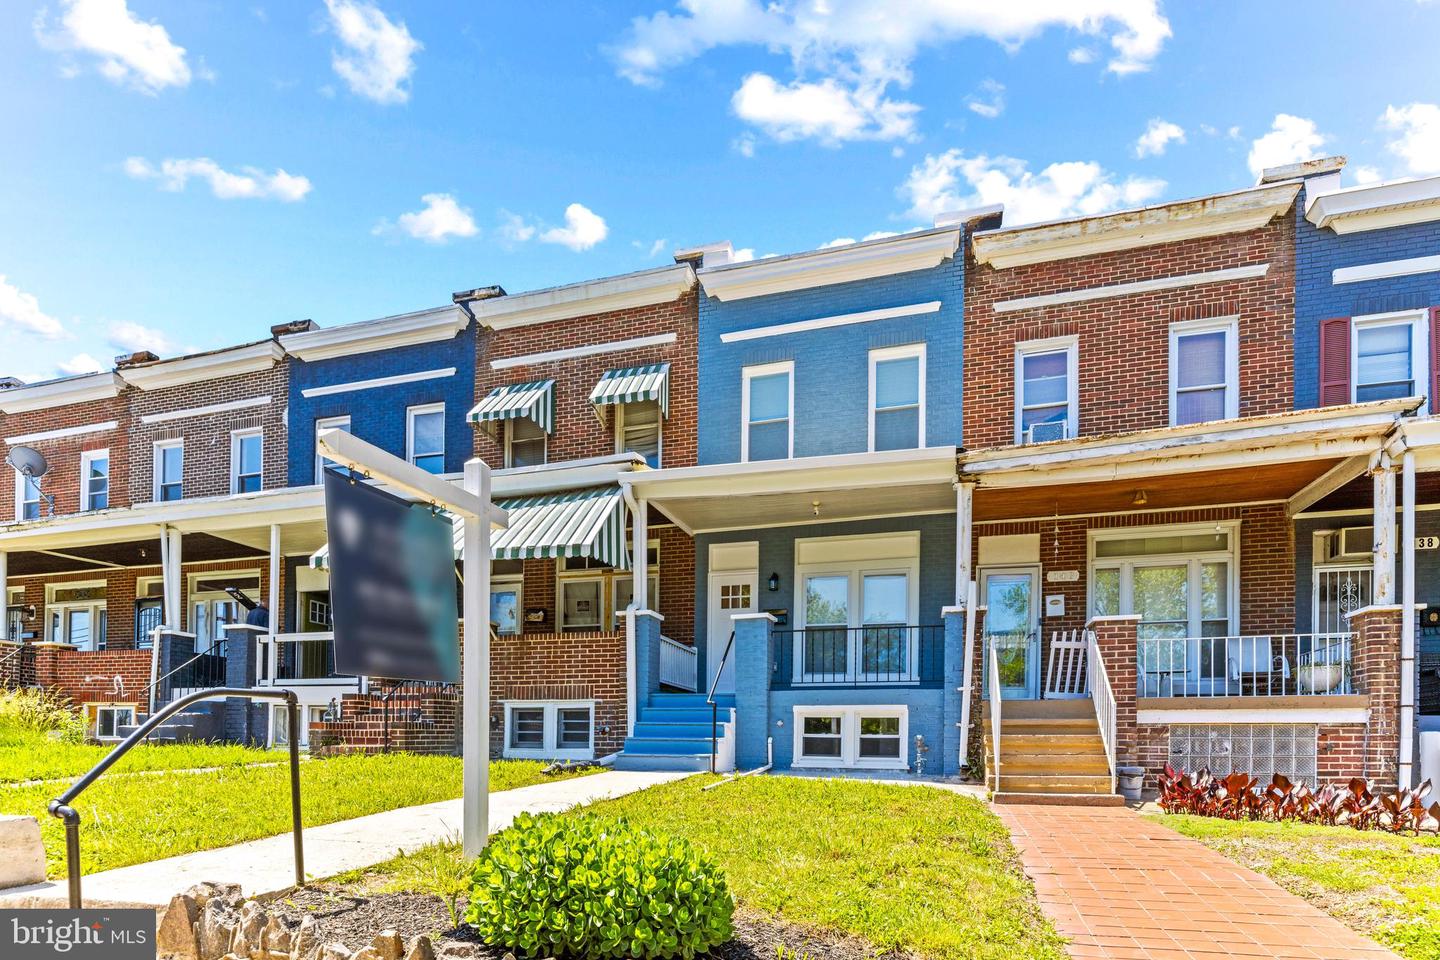 View Baltimore, MD 21229 townhome